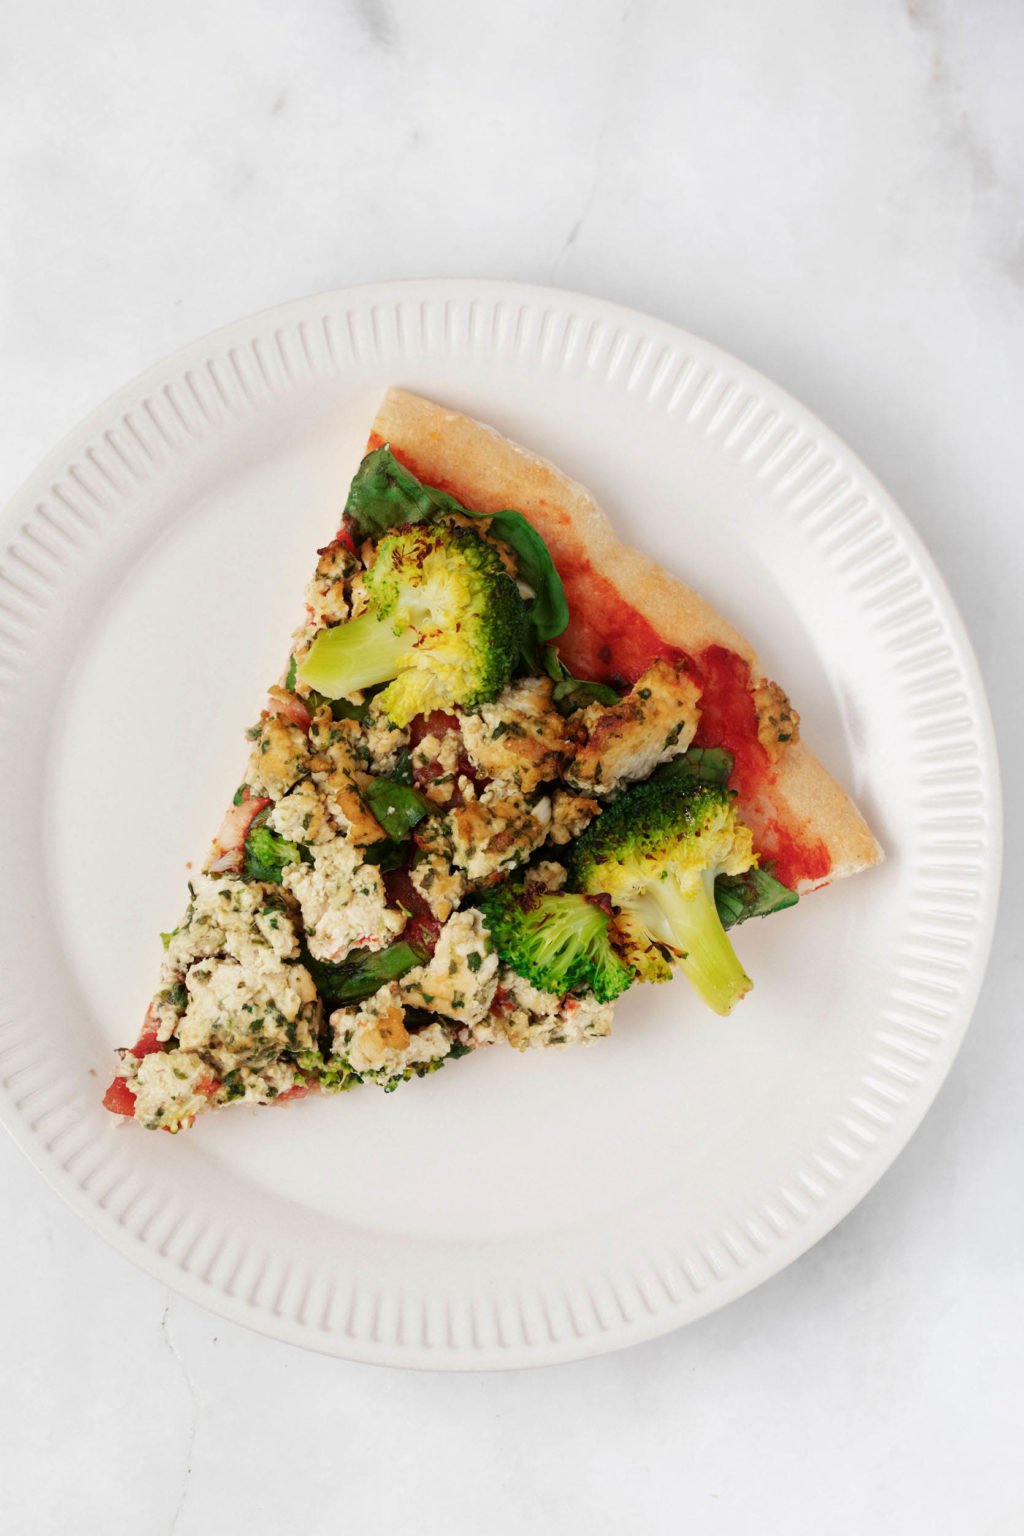 A slice of vegan flatbread is topped with vegetables and tofu.